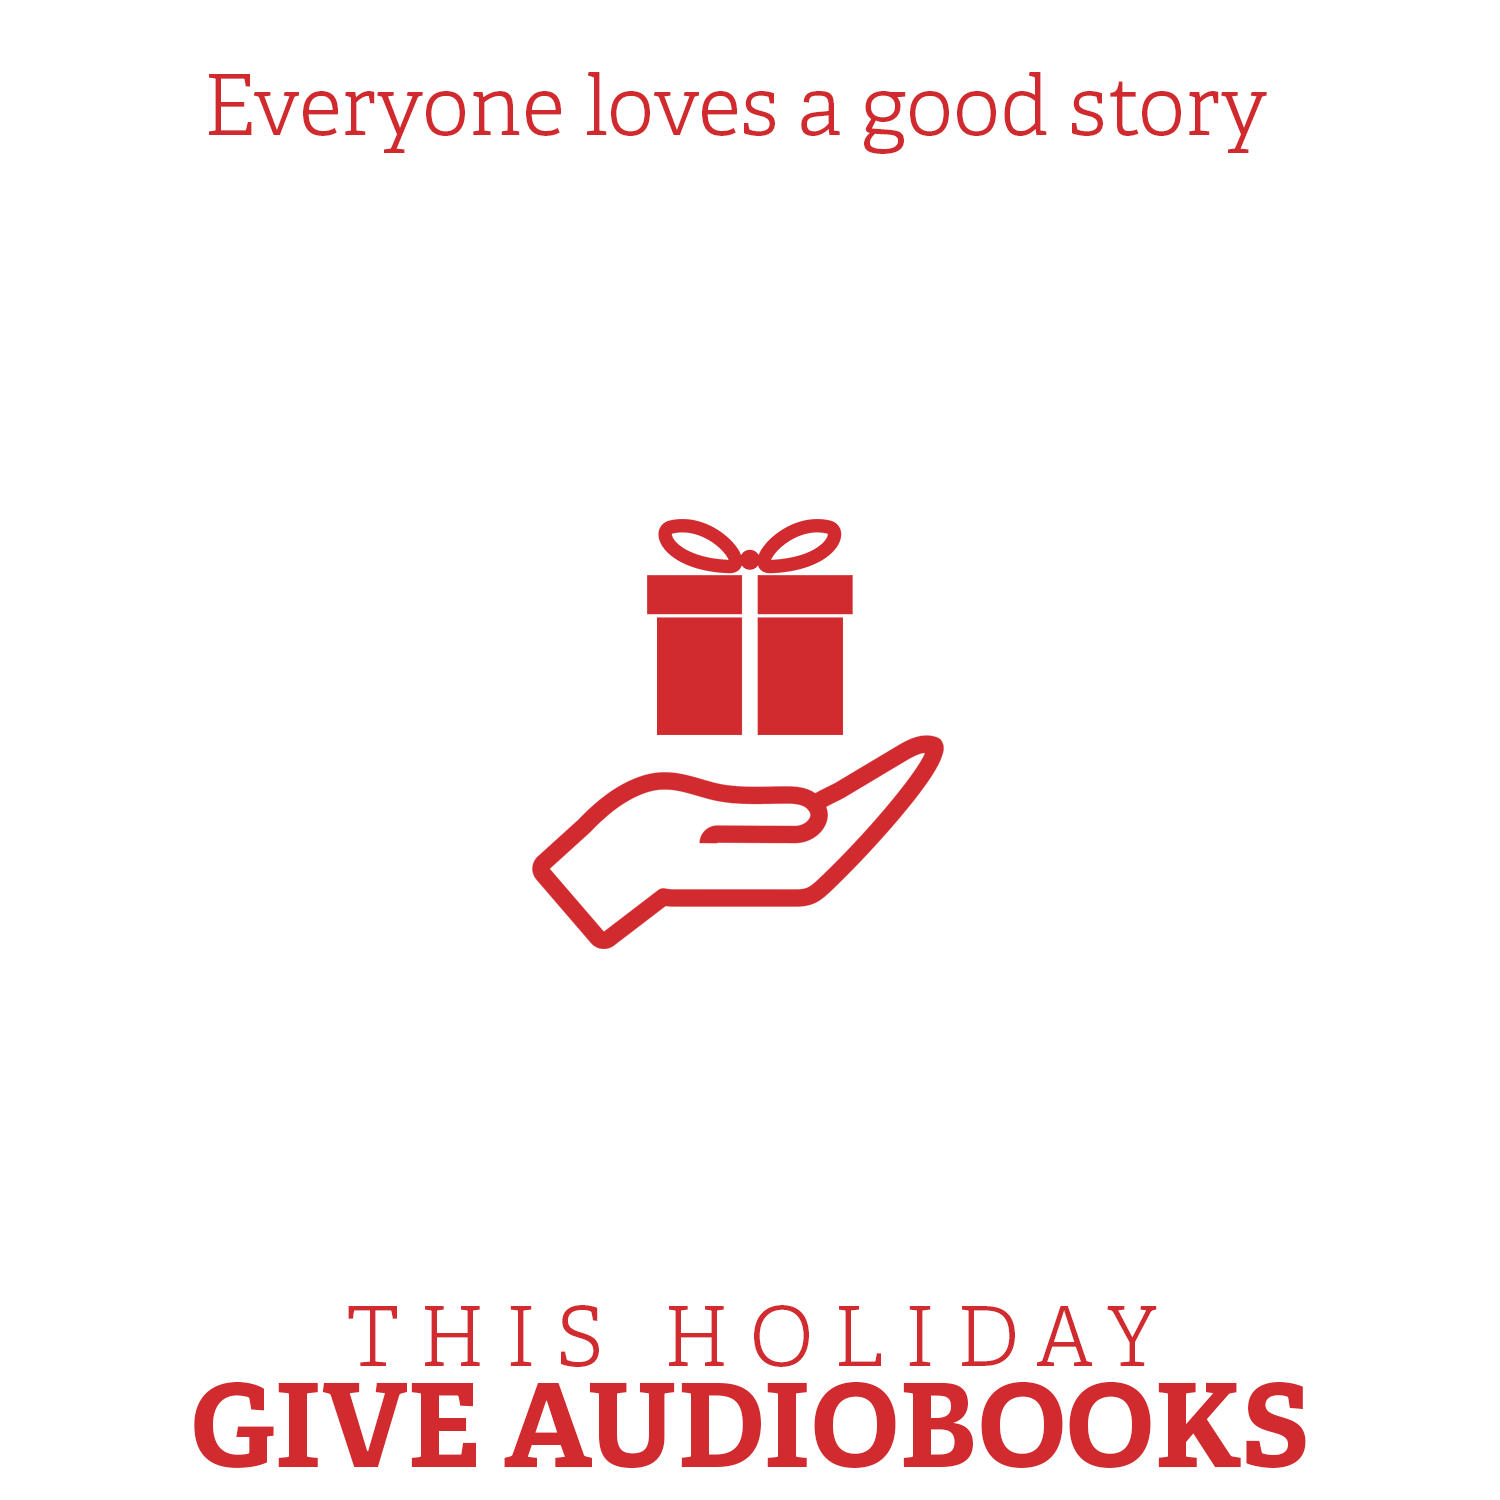 How to Give Audiobooks